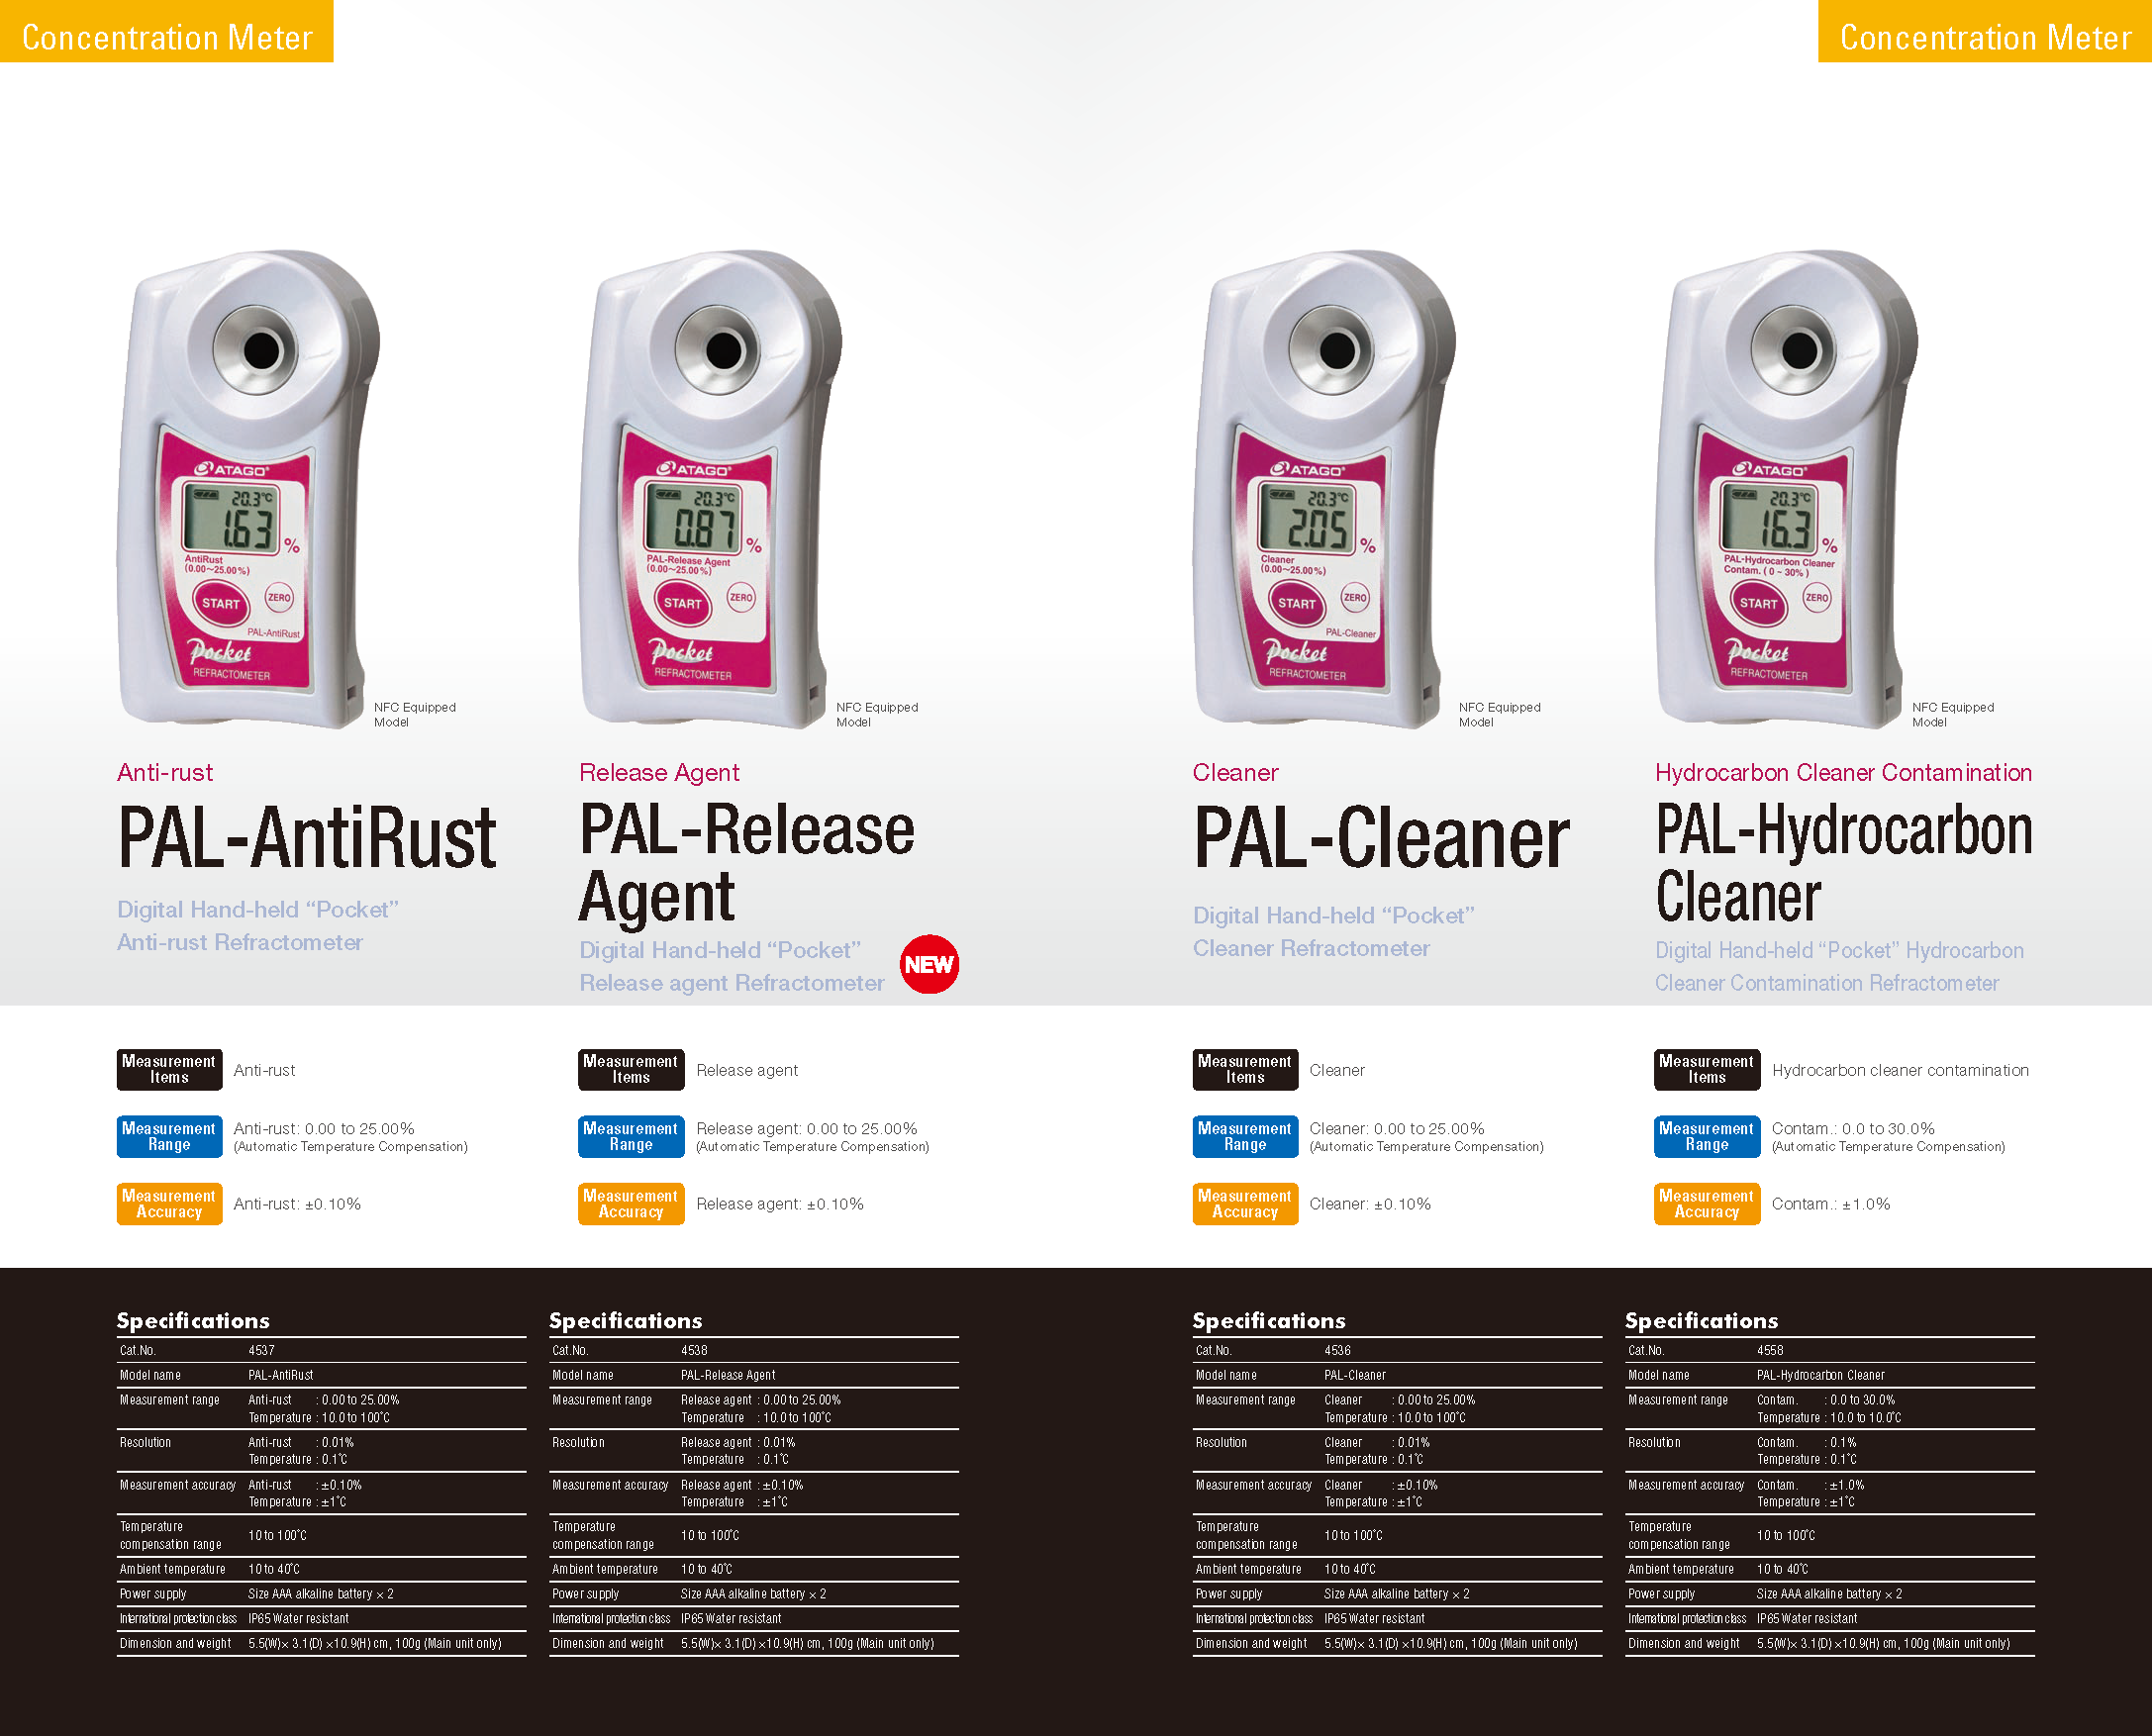 PAL-AntiRust / PAL-Release Agent / PAL-Cleaner / PAL-Hydrocarbon Cleaner